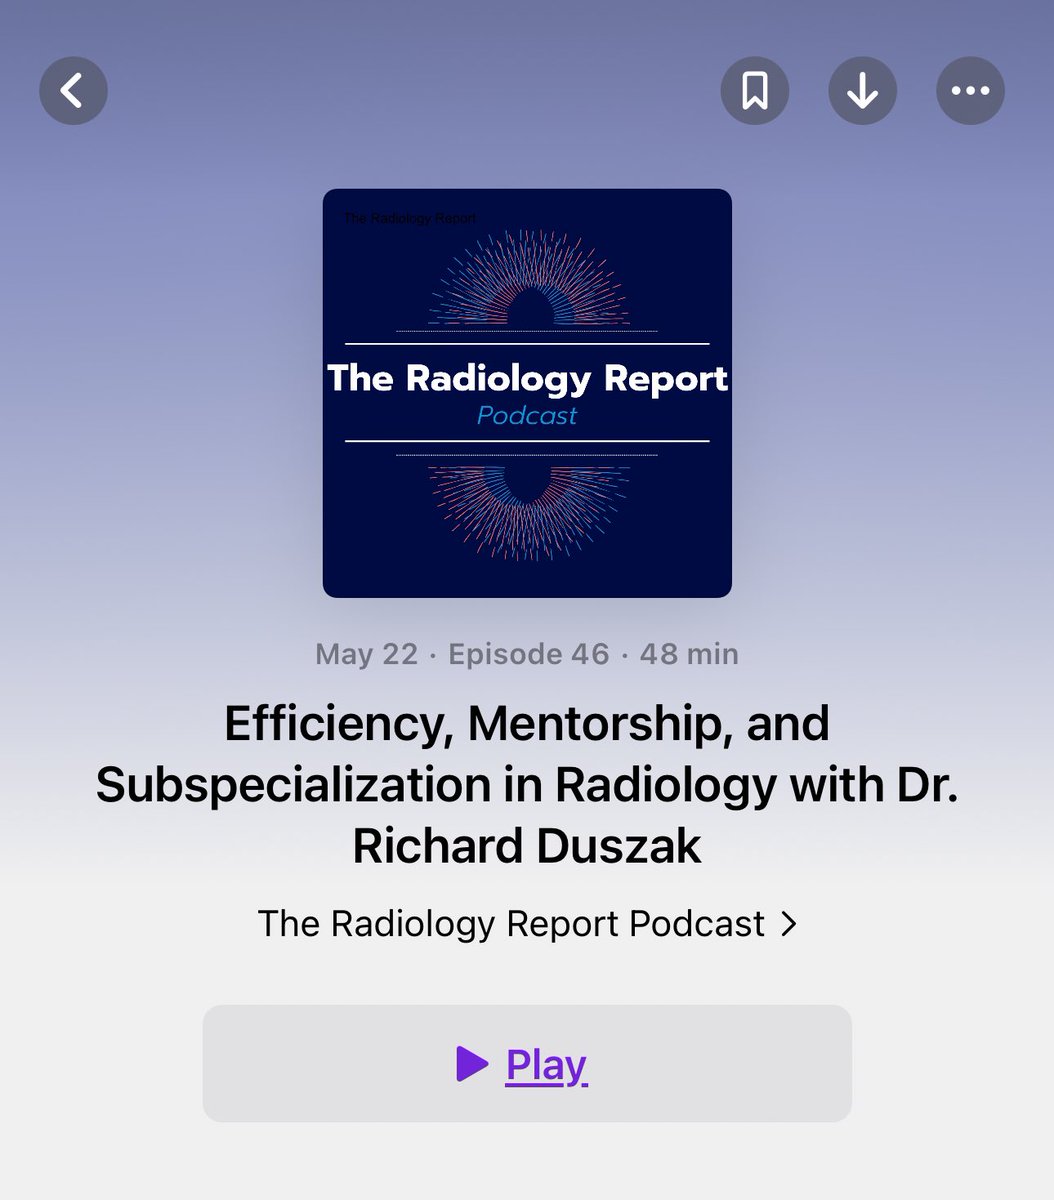 Check out the latest @radreportpod featuring our chair, @RichDuszak, speaking on “Efficiency, Mentorship, and Subspecialization in Radiology.” 🔗 podcasts.apple.com/us/podcast/the…